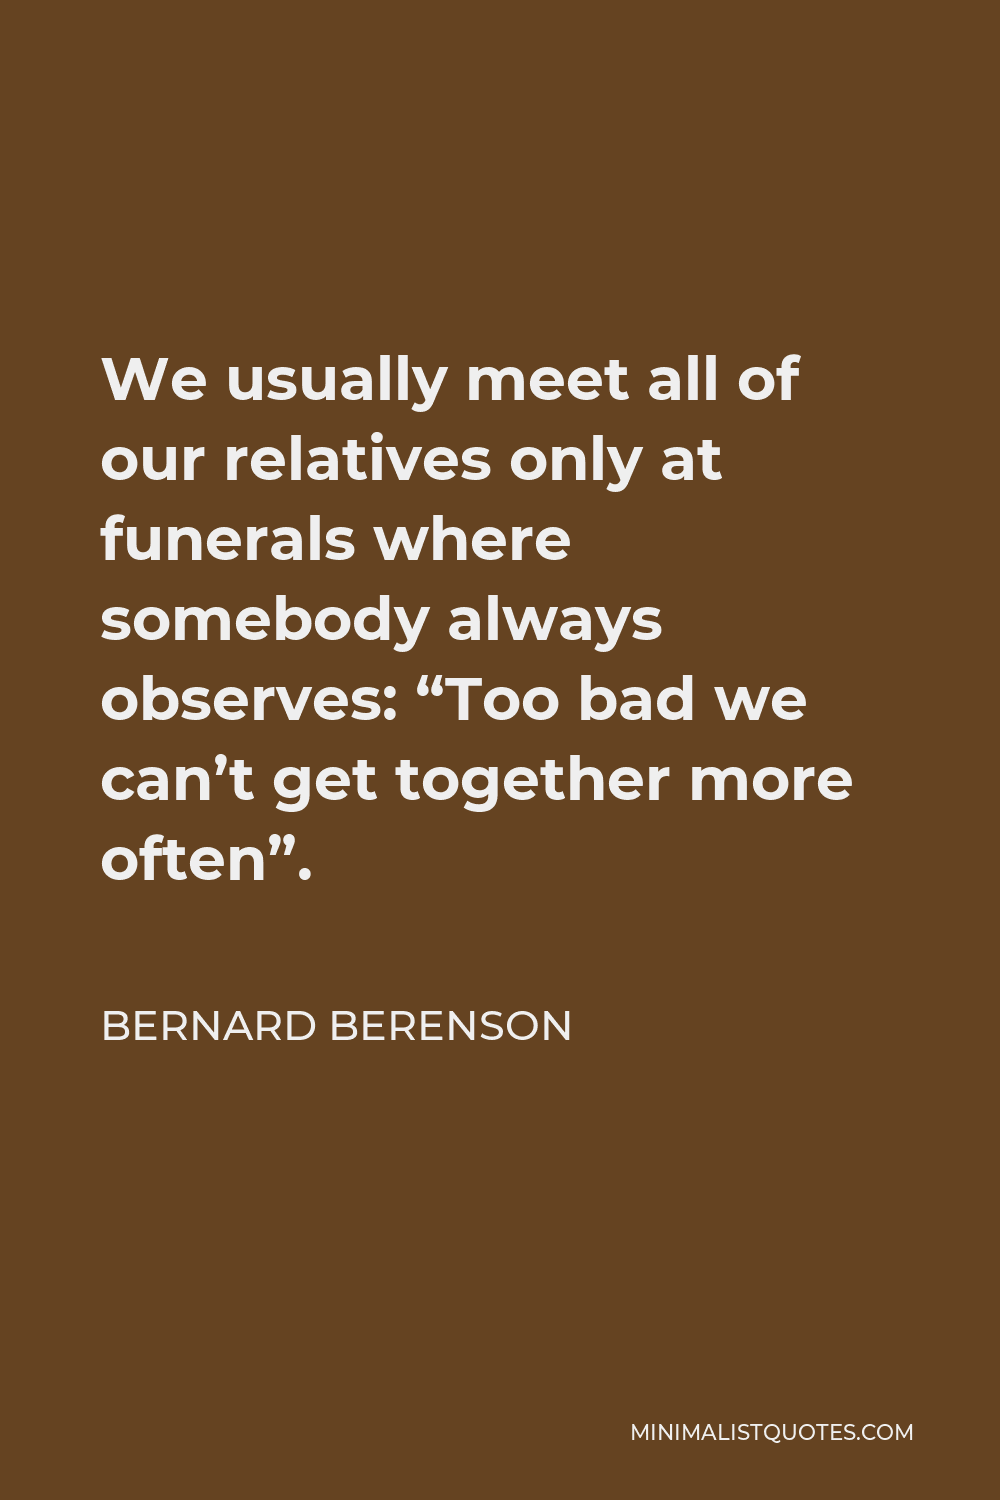 Bernard Berenson Quote - We usually meet all of our relatives only at funerals where somebody always observes: “Too bad we can’t get together more often”.